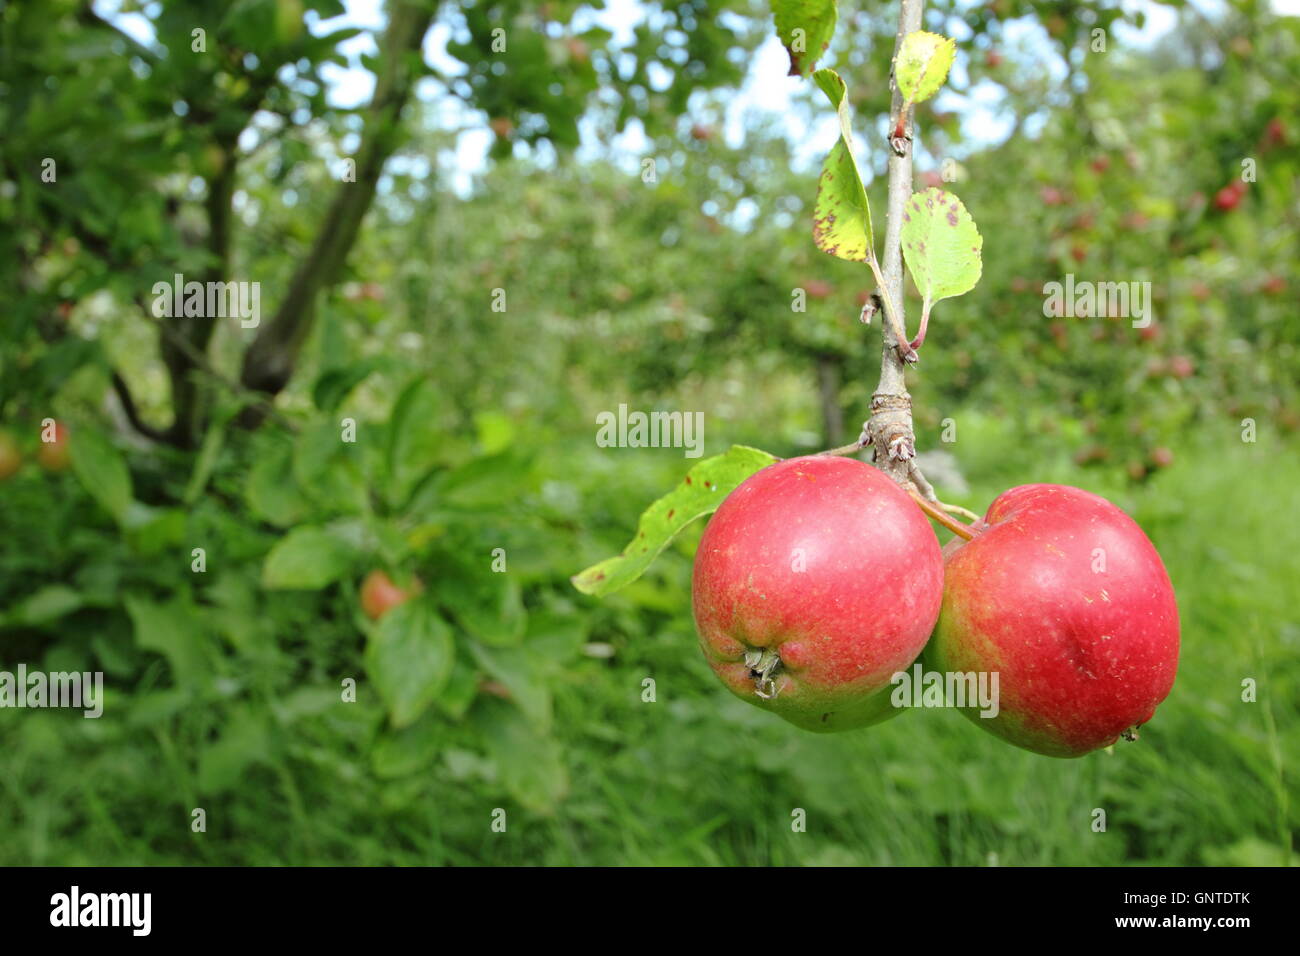 Attractive red apples of the Swedish 'Katy' variety grow in an English orchard garden - August Stock Photo